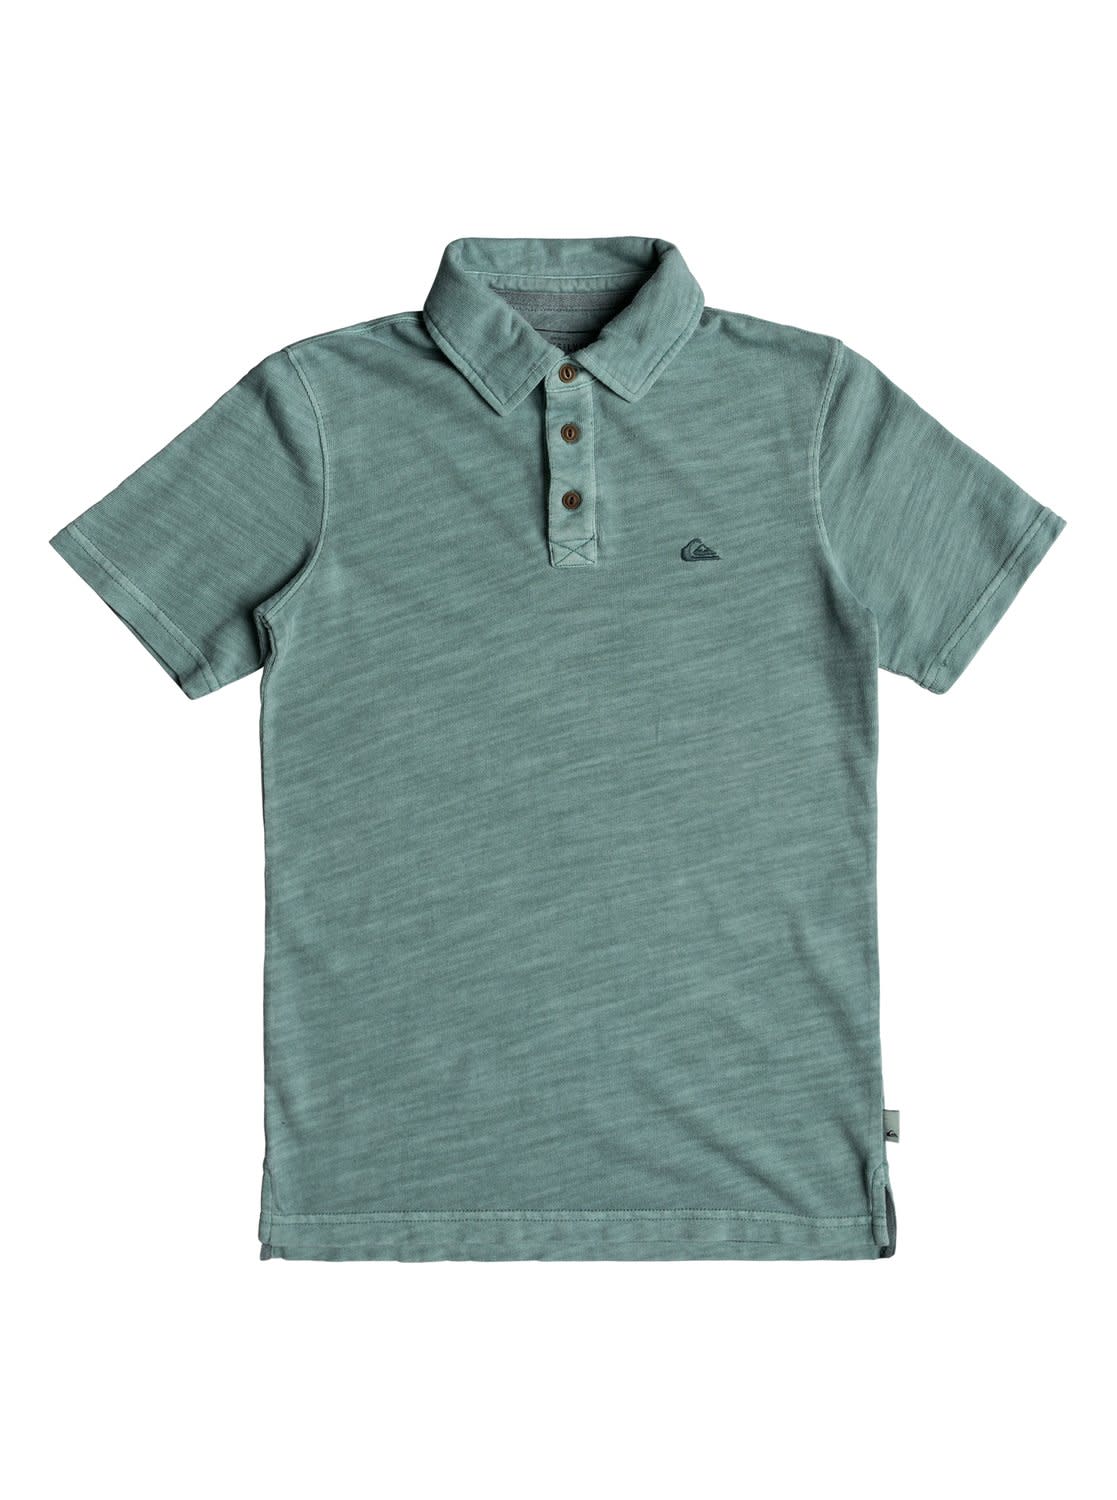 Quiksilver Everyday Sun Cruise Youth Polo